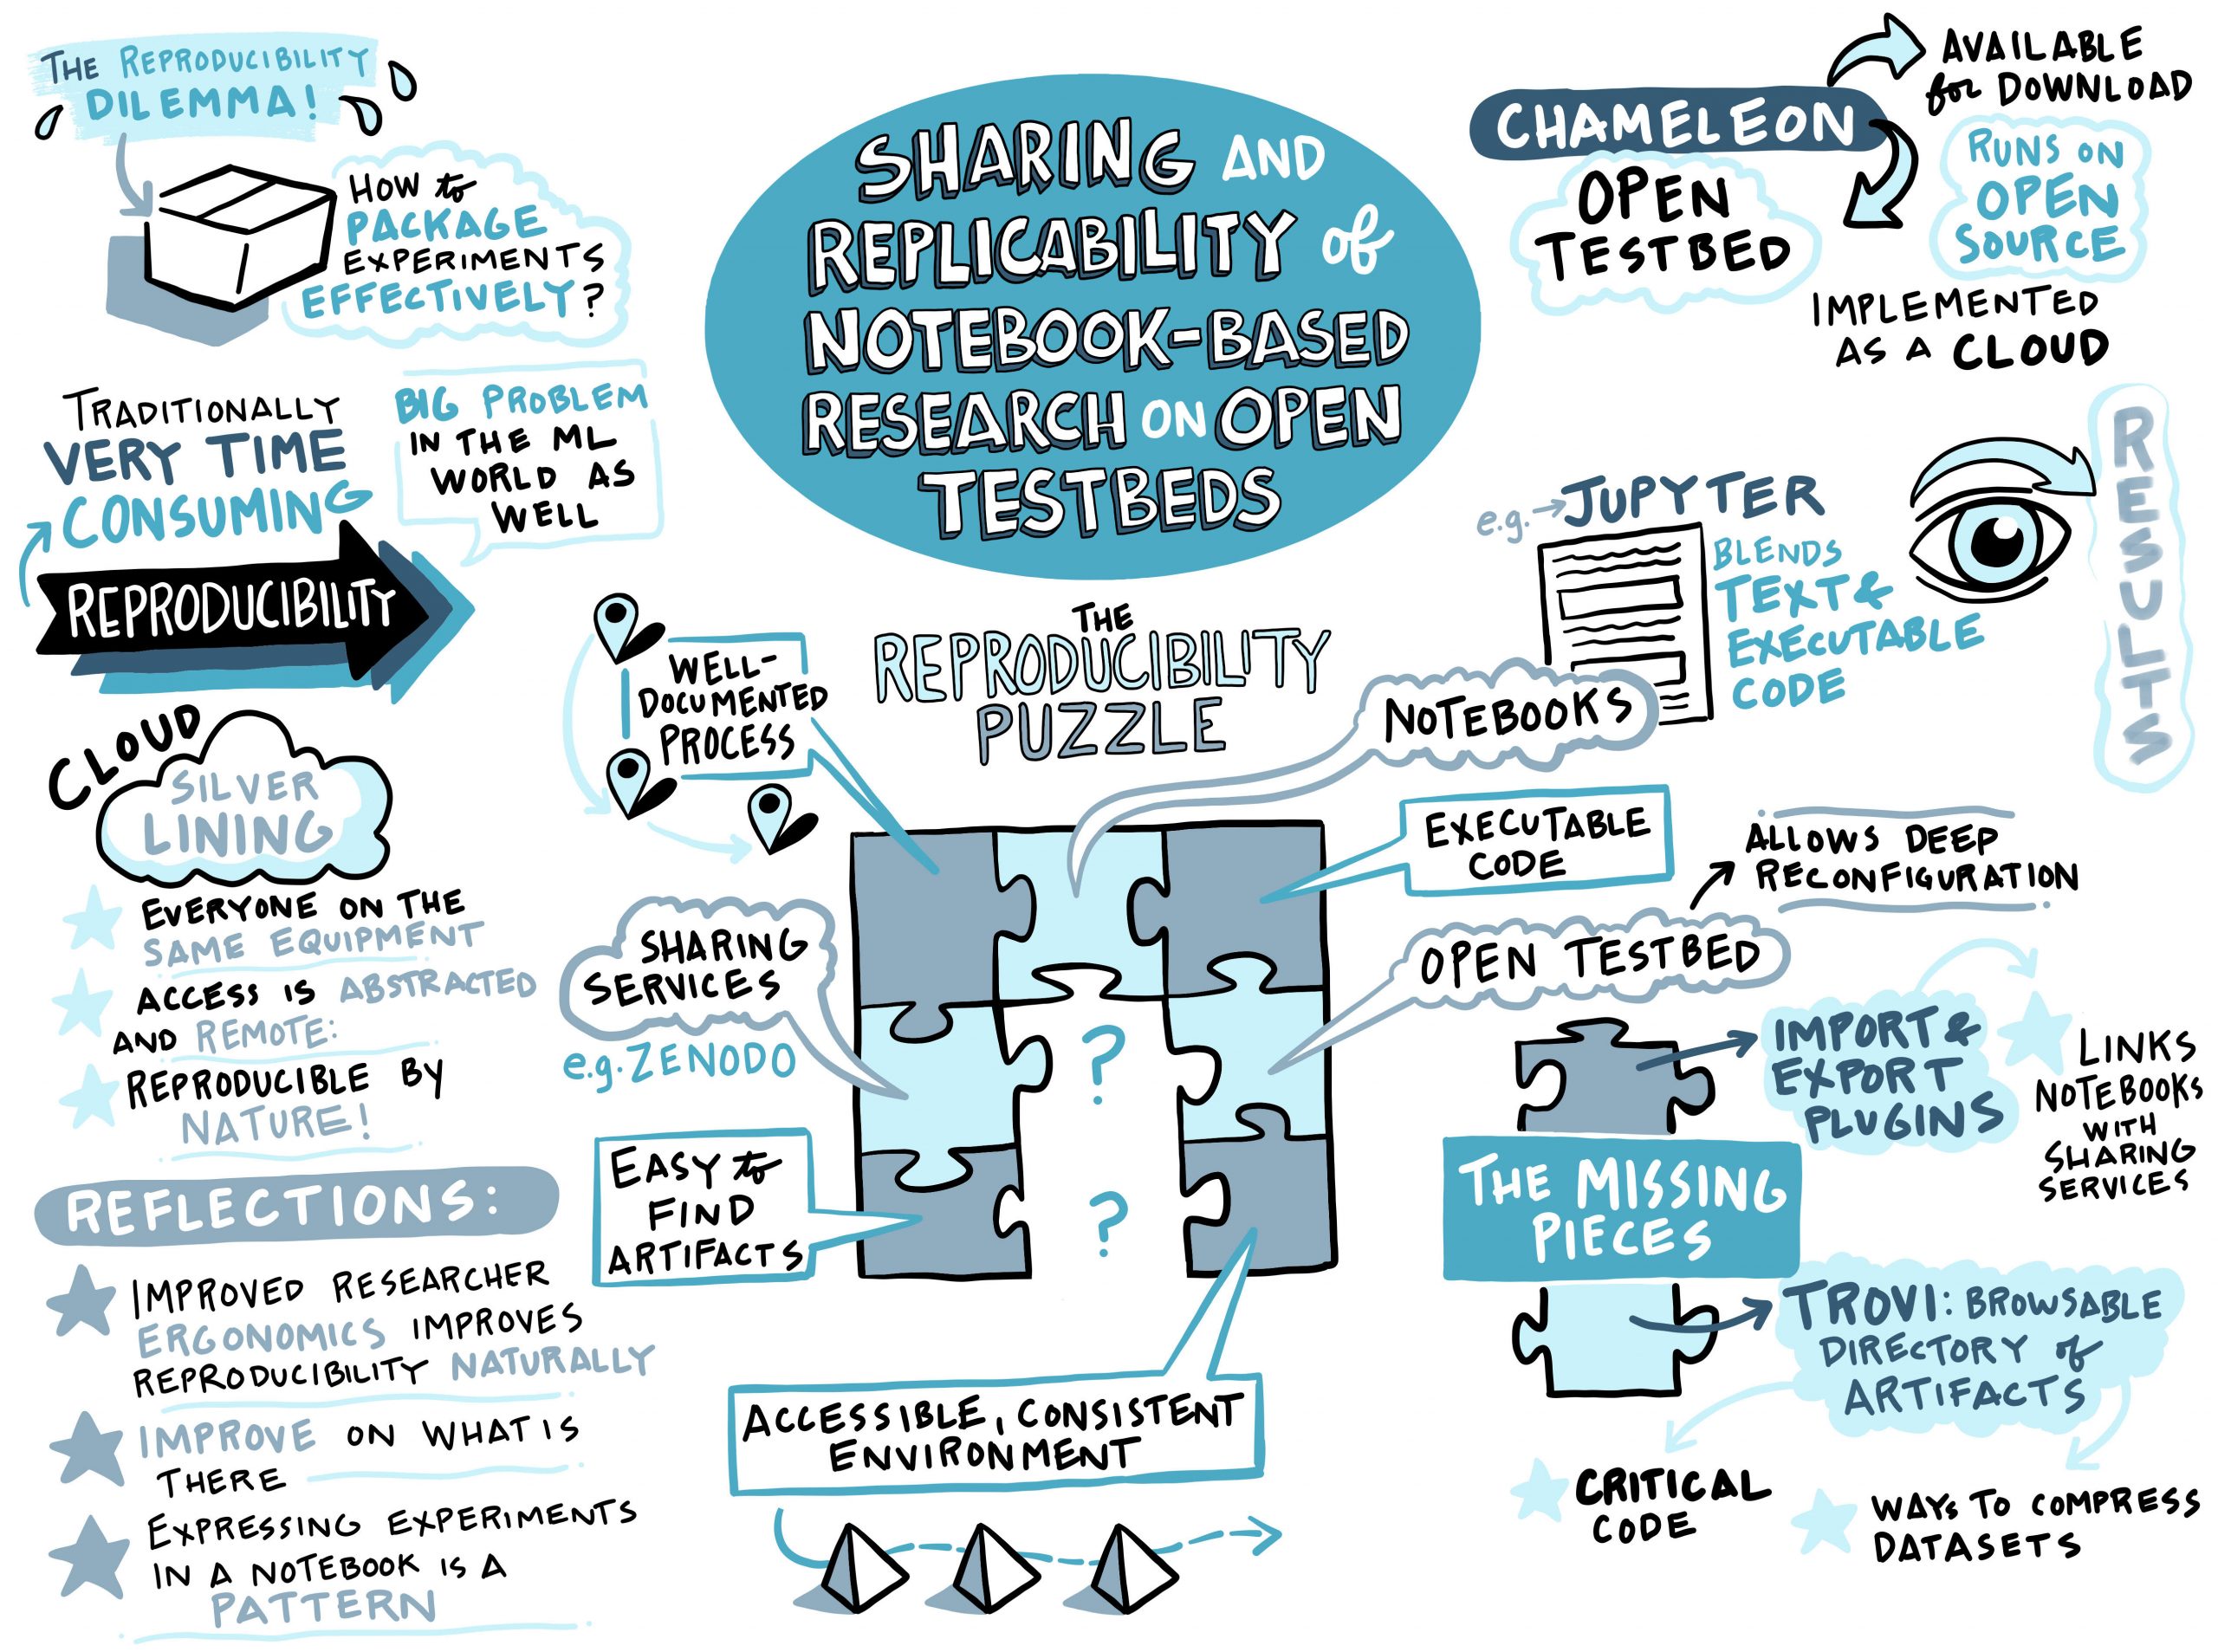 Digital Illustration from talk: Sharing and Replicability of Notebook-Based Research on Open Testbeds